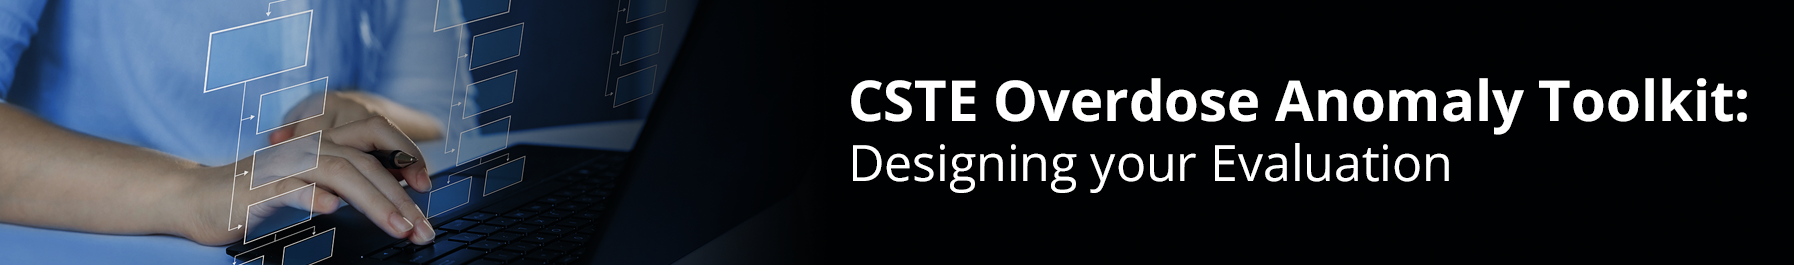 CSTE Overdose Anomaly Toolkit: Designing your Evaluation